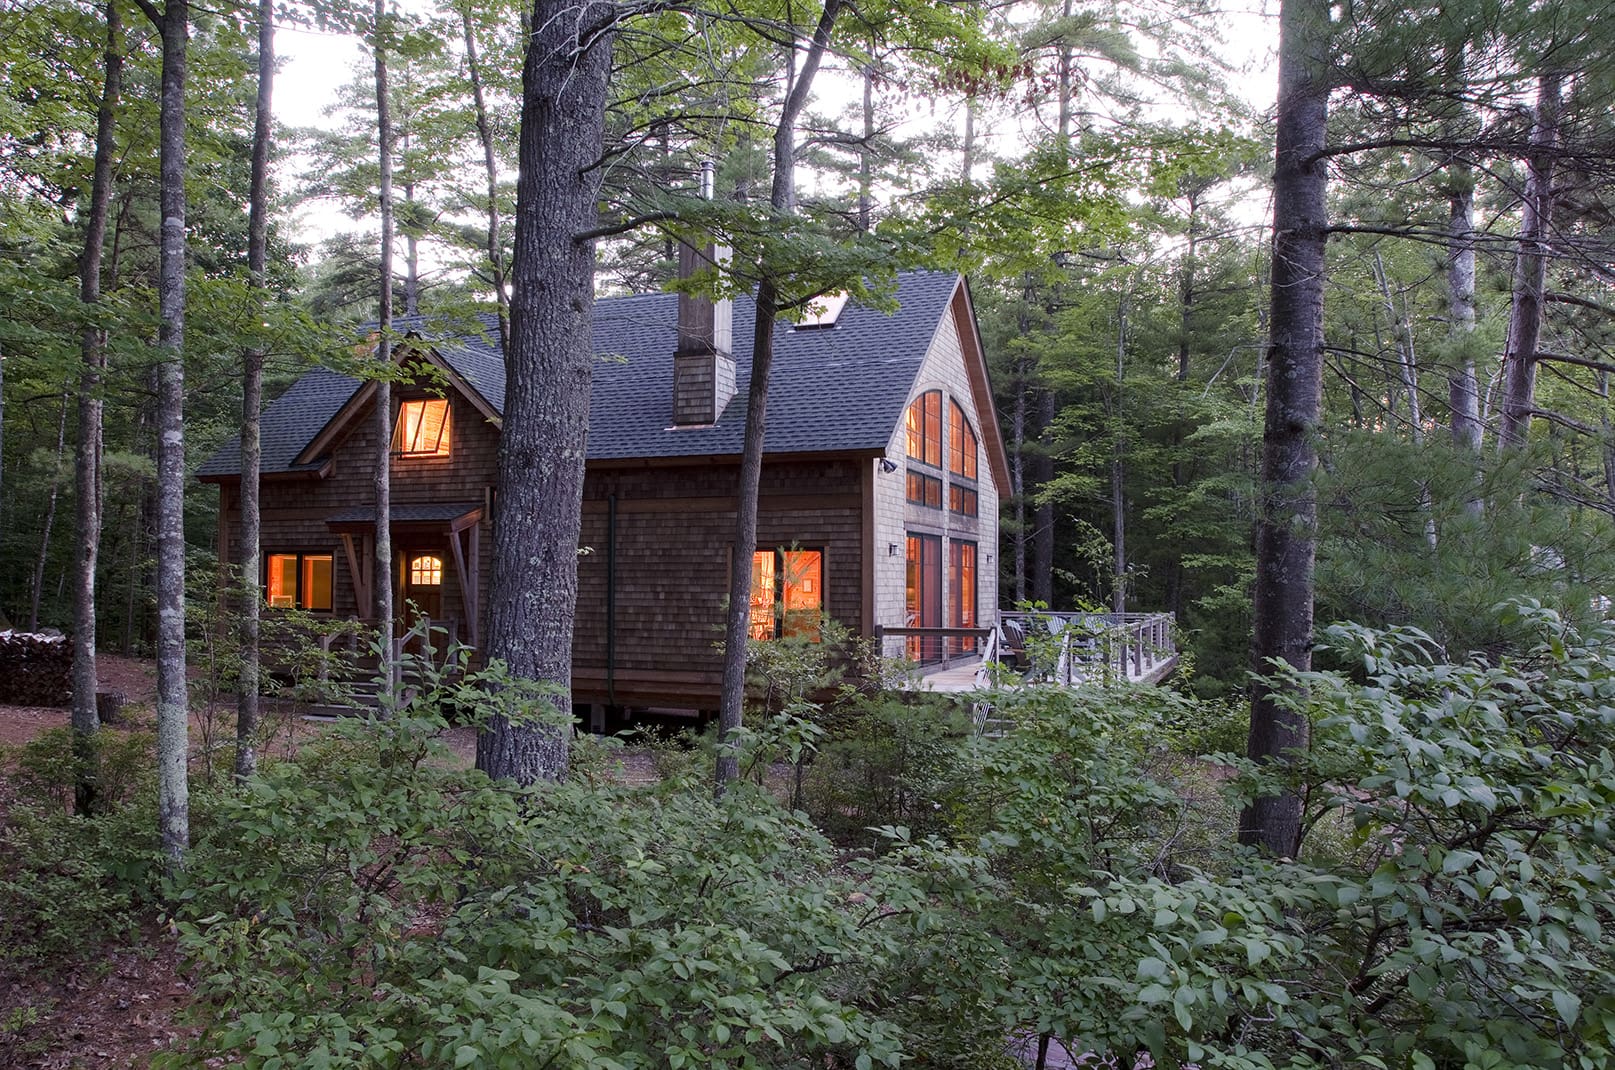 A rustic prefab cabin in the woods